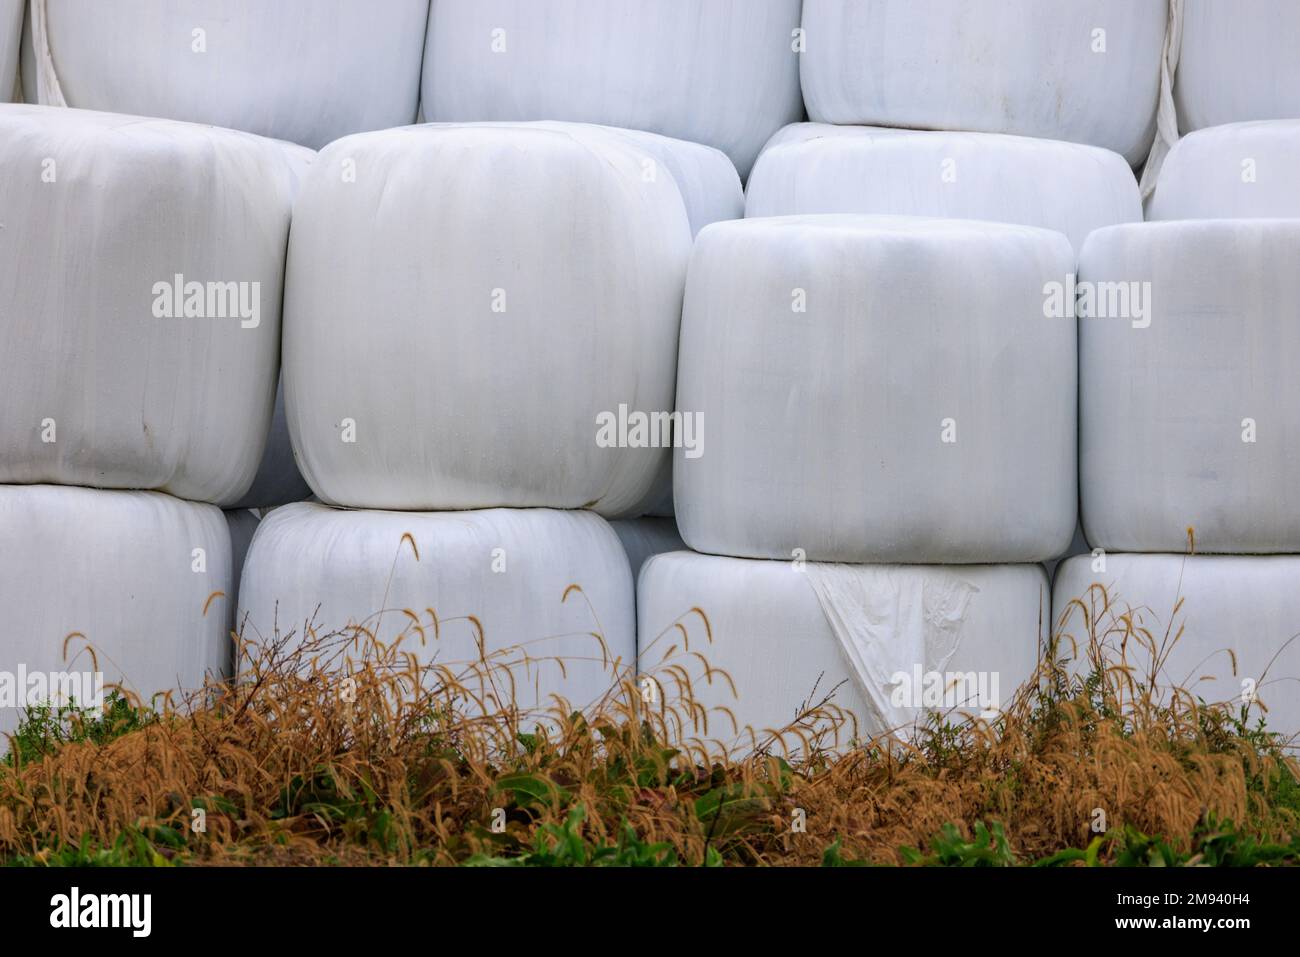 Hay Bales Wrapped in Plastic and Stacked for Outdoor Storage at Farm Stock Photo